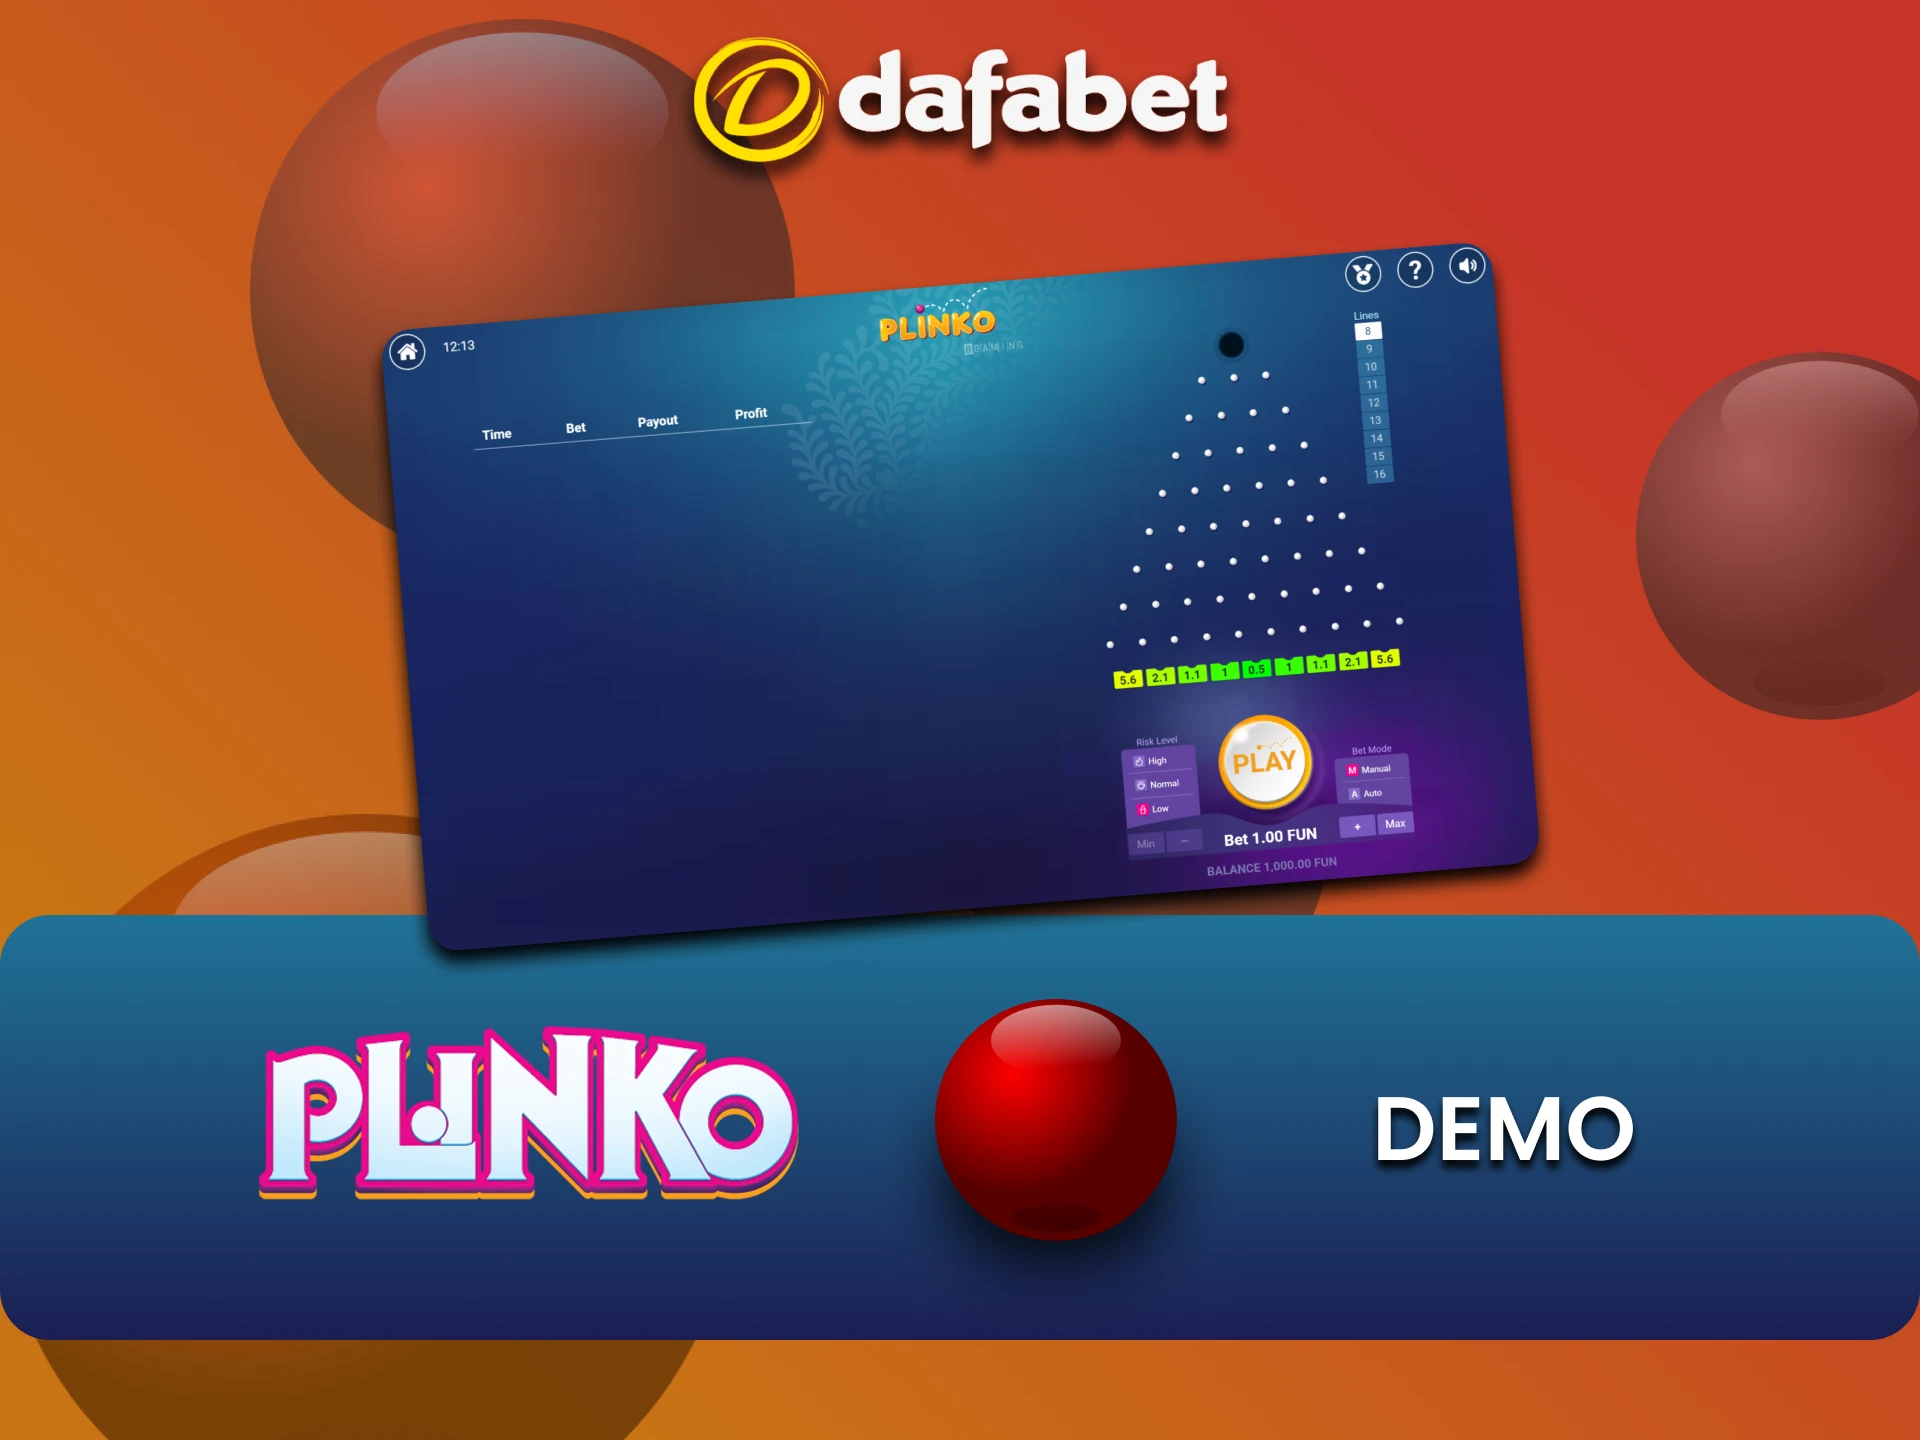 Practice in the demo version of the Plinko game on Dafabet.